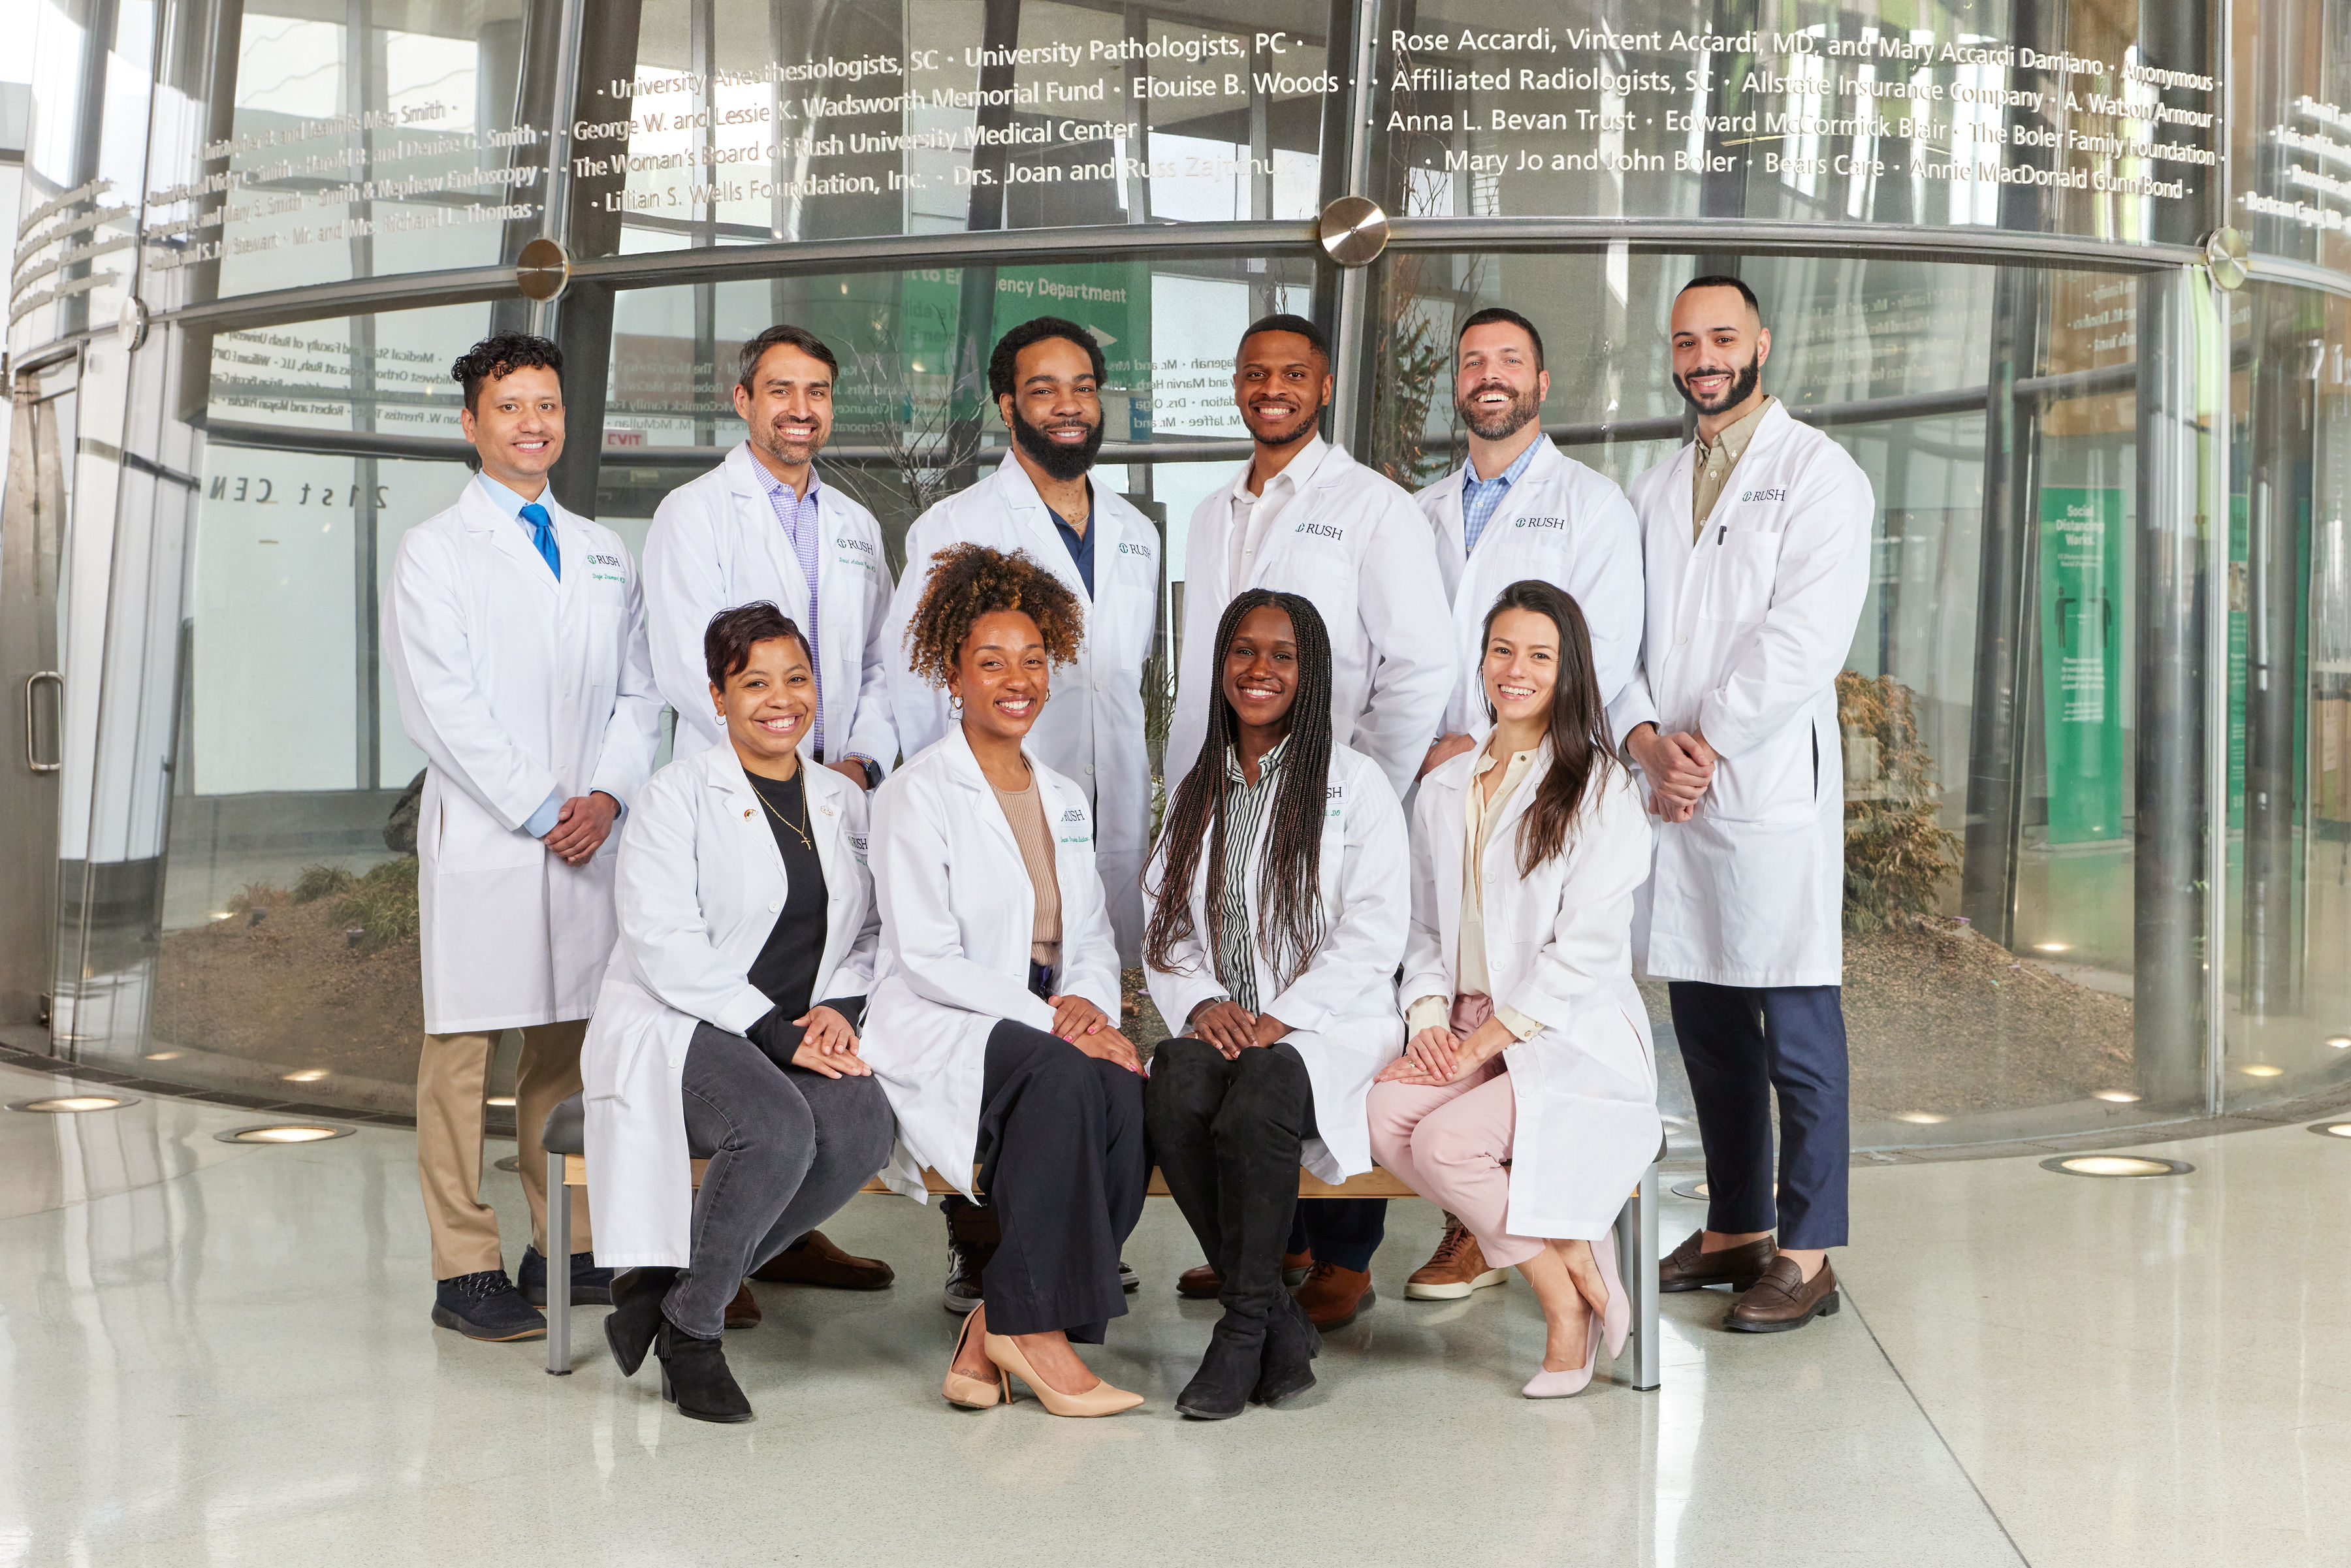 A diverse group of residents stand together in the RUSH University Medical Center Atrium.